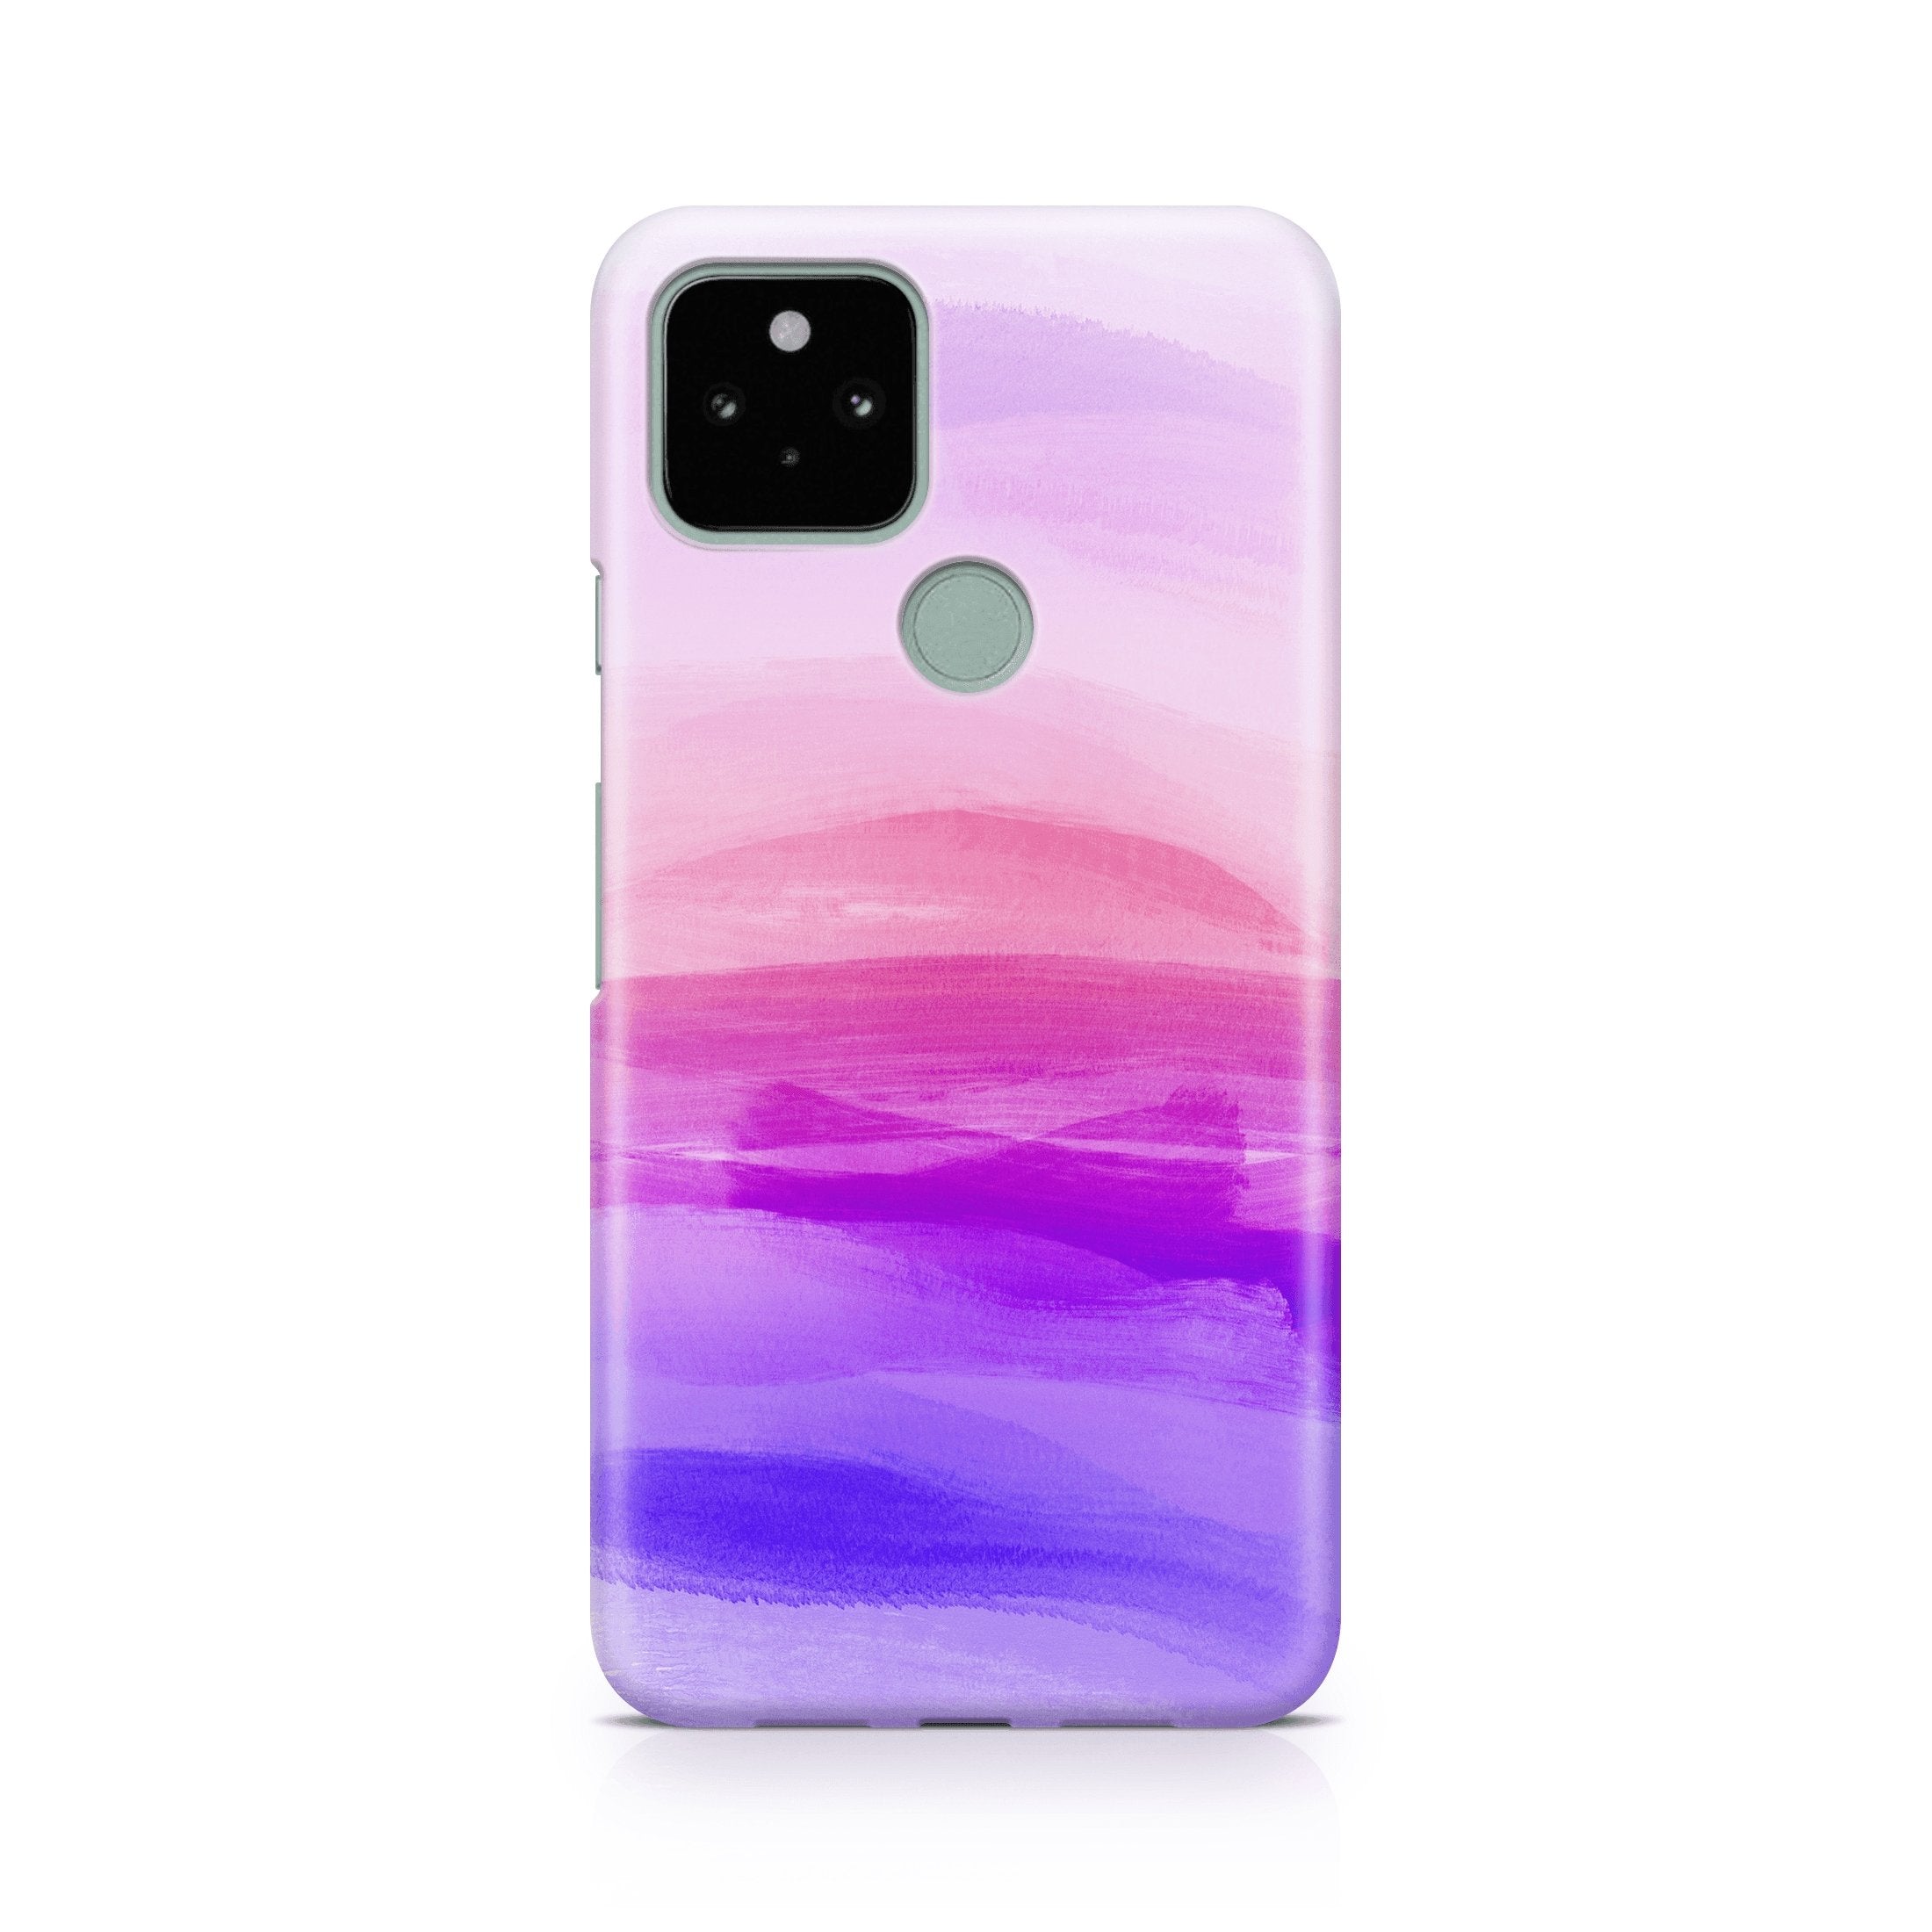 Sunrise Pink Ombre - Google phone case designs by CaseSwagger